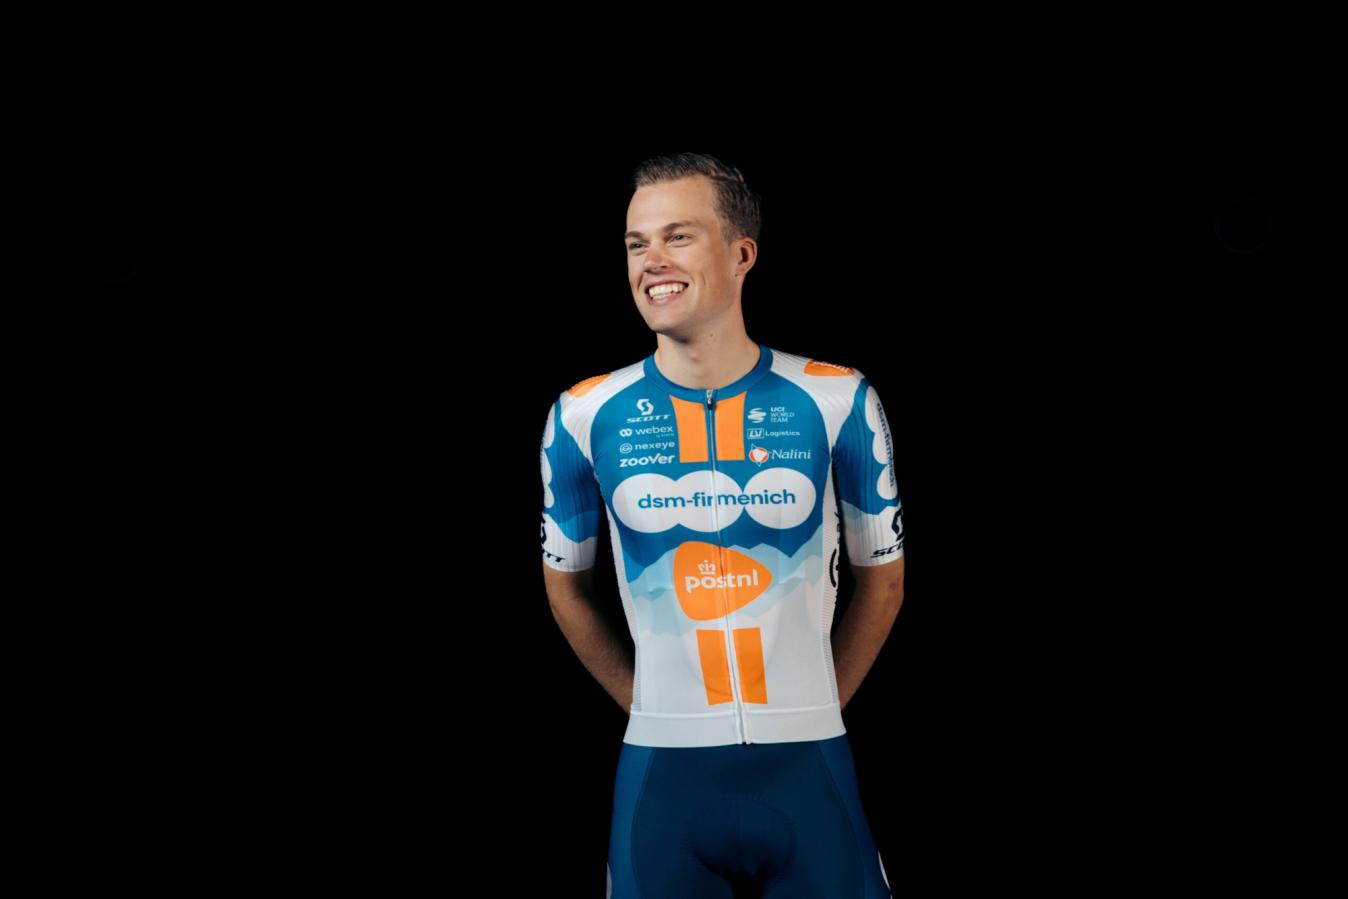 The new dsm-firmenich PostNL kit looks perfect for a summer's day